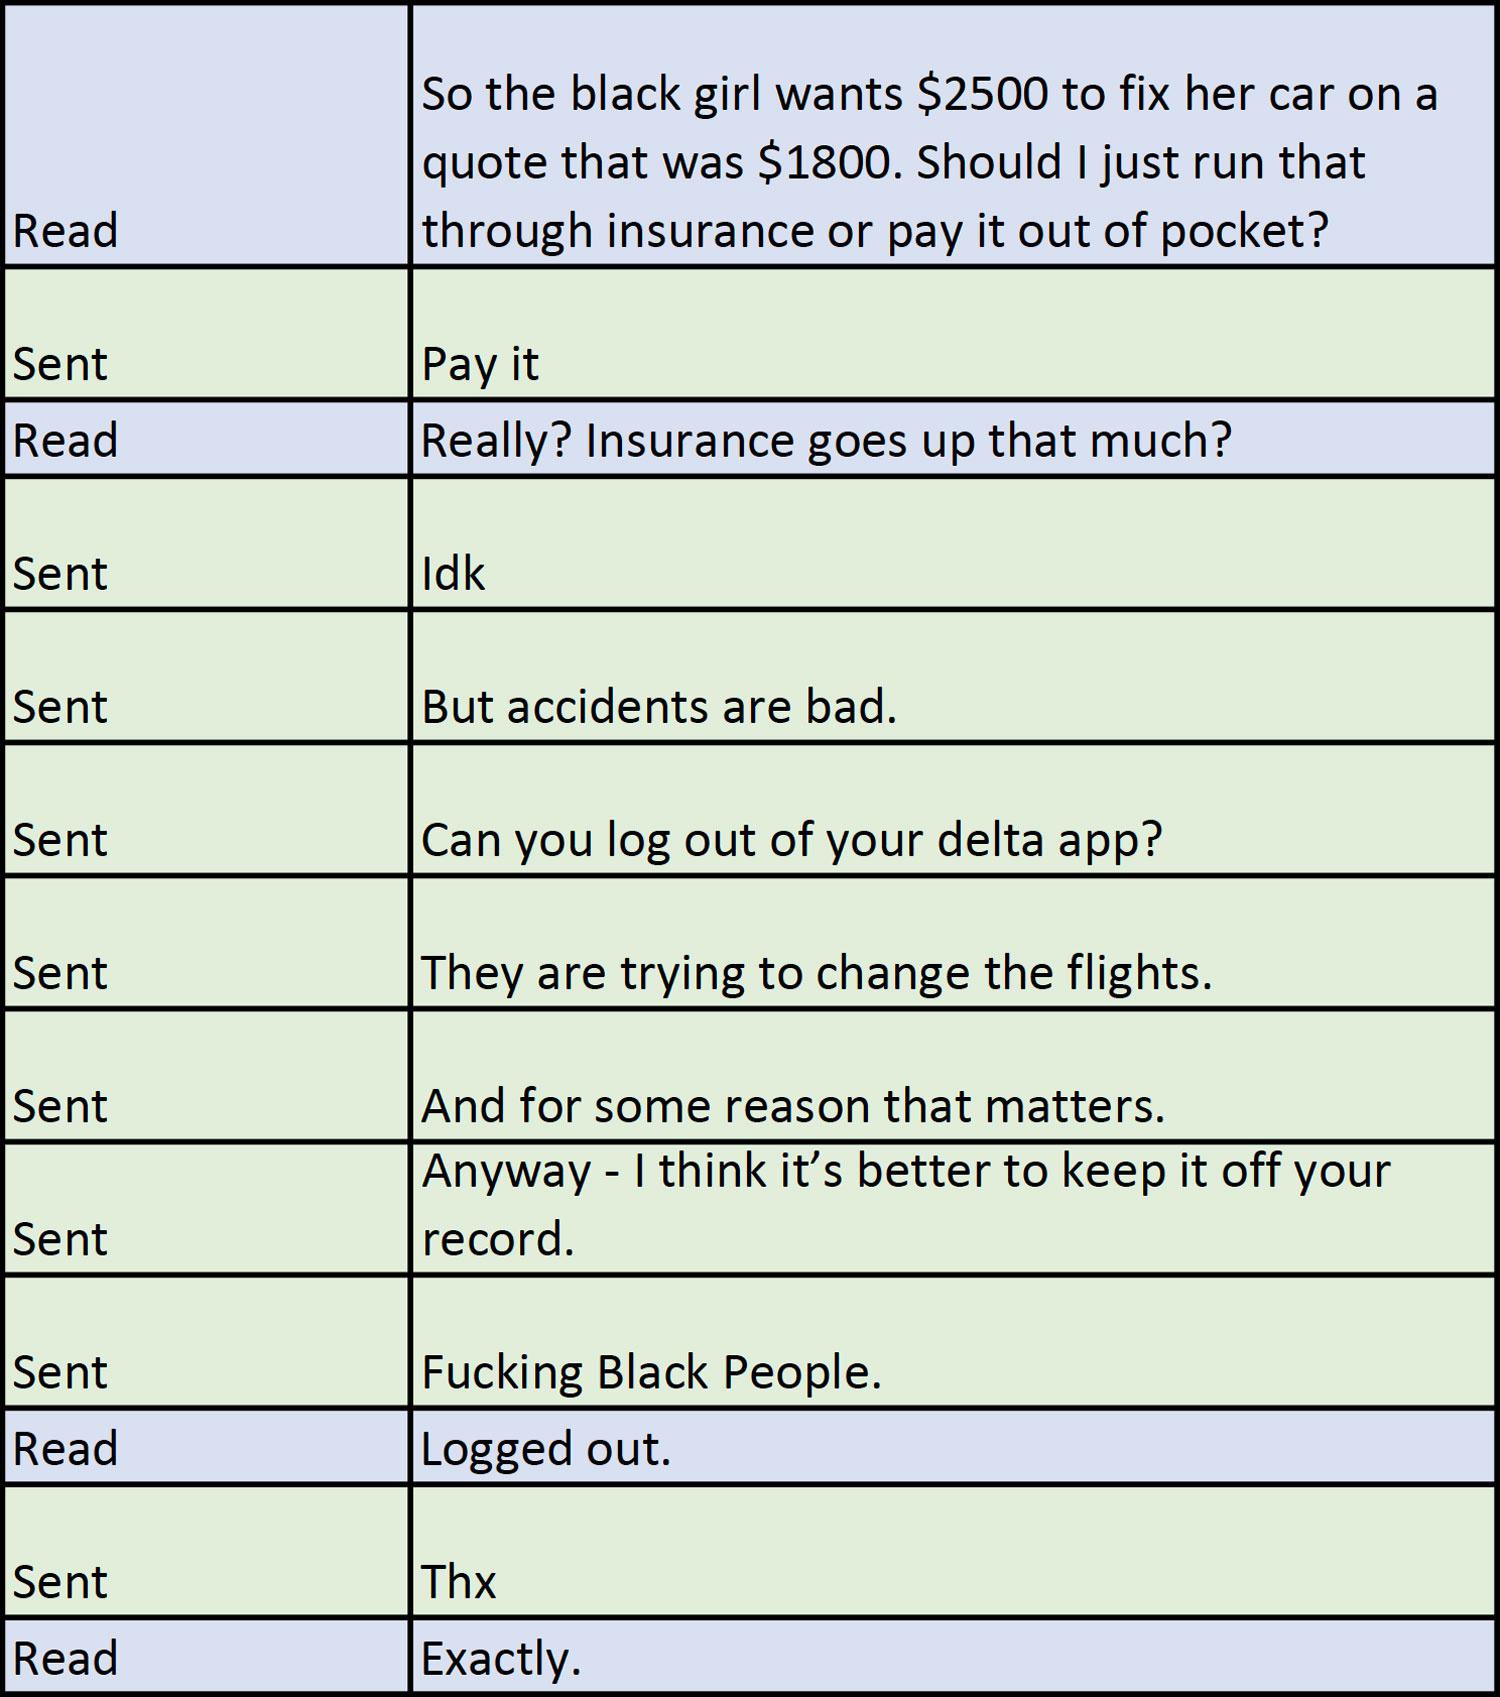 Messages between Ryan Millsap (sent) and Christy Hockmeyer (read) in 2019. Read: So the black girl wants $2500 to fix her car on a quote that was $1800. Should I just run that through insurance or pay it out of pocket? Sent: Pay it Read: Really? Insurance goes up that much? Sent: Idk Sent: But accidents are bad. Sent: Can you log out of your delta app? Sent: They are trying to change the flights. Sent: And for some reason that matters. Sent: Anyway — I think it’s better to keep off your record. Sent: Fucking Black People. Read: Logged out. Sent: Thx Read: Exactly.